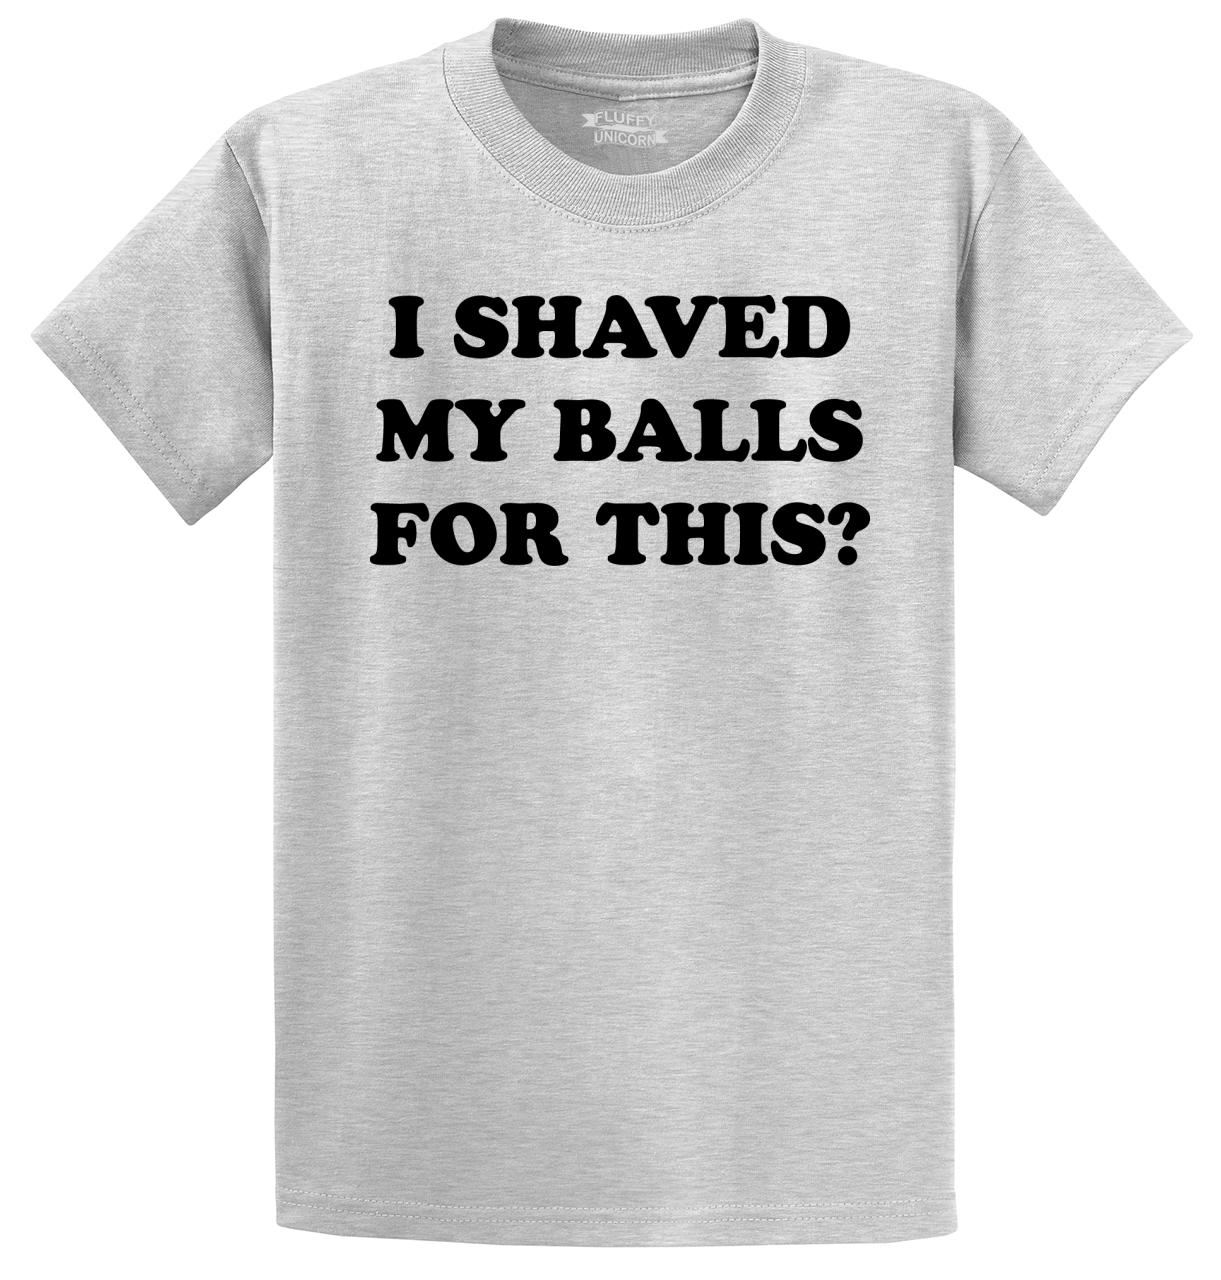 I Shaved My Balls For This Funny T Shirt Adult Humor Rude Sex 